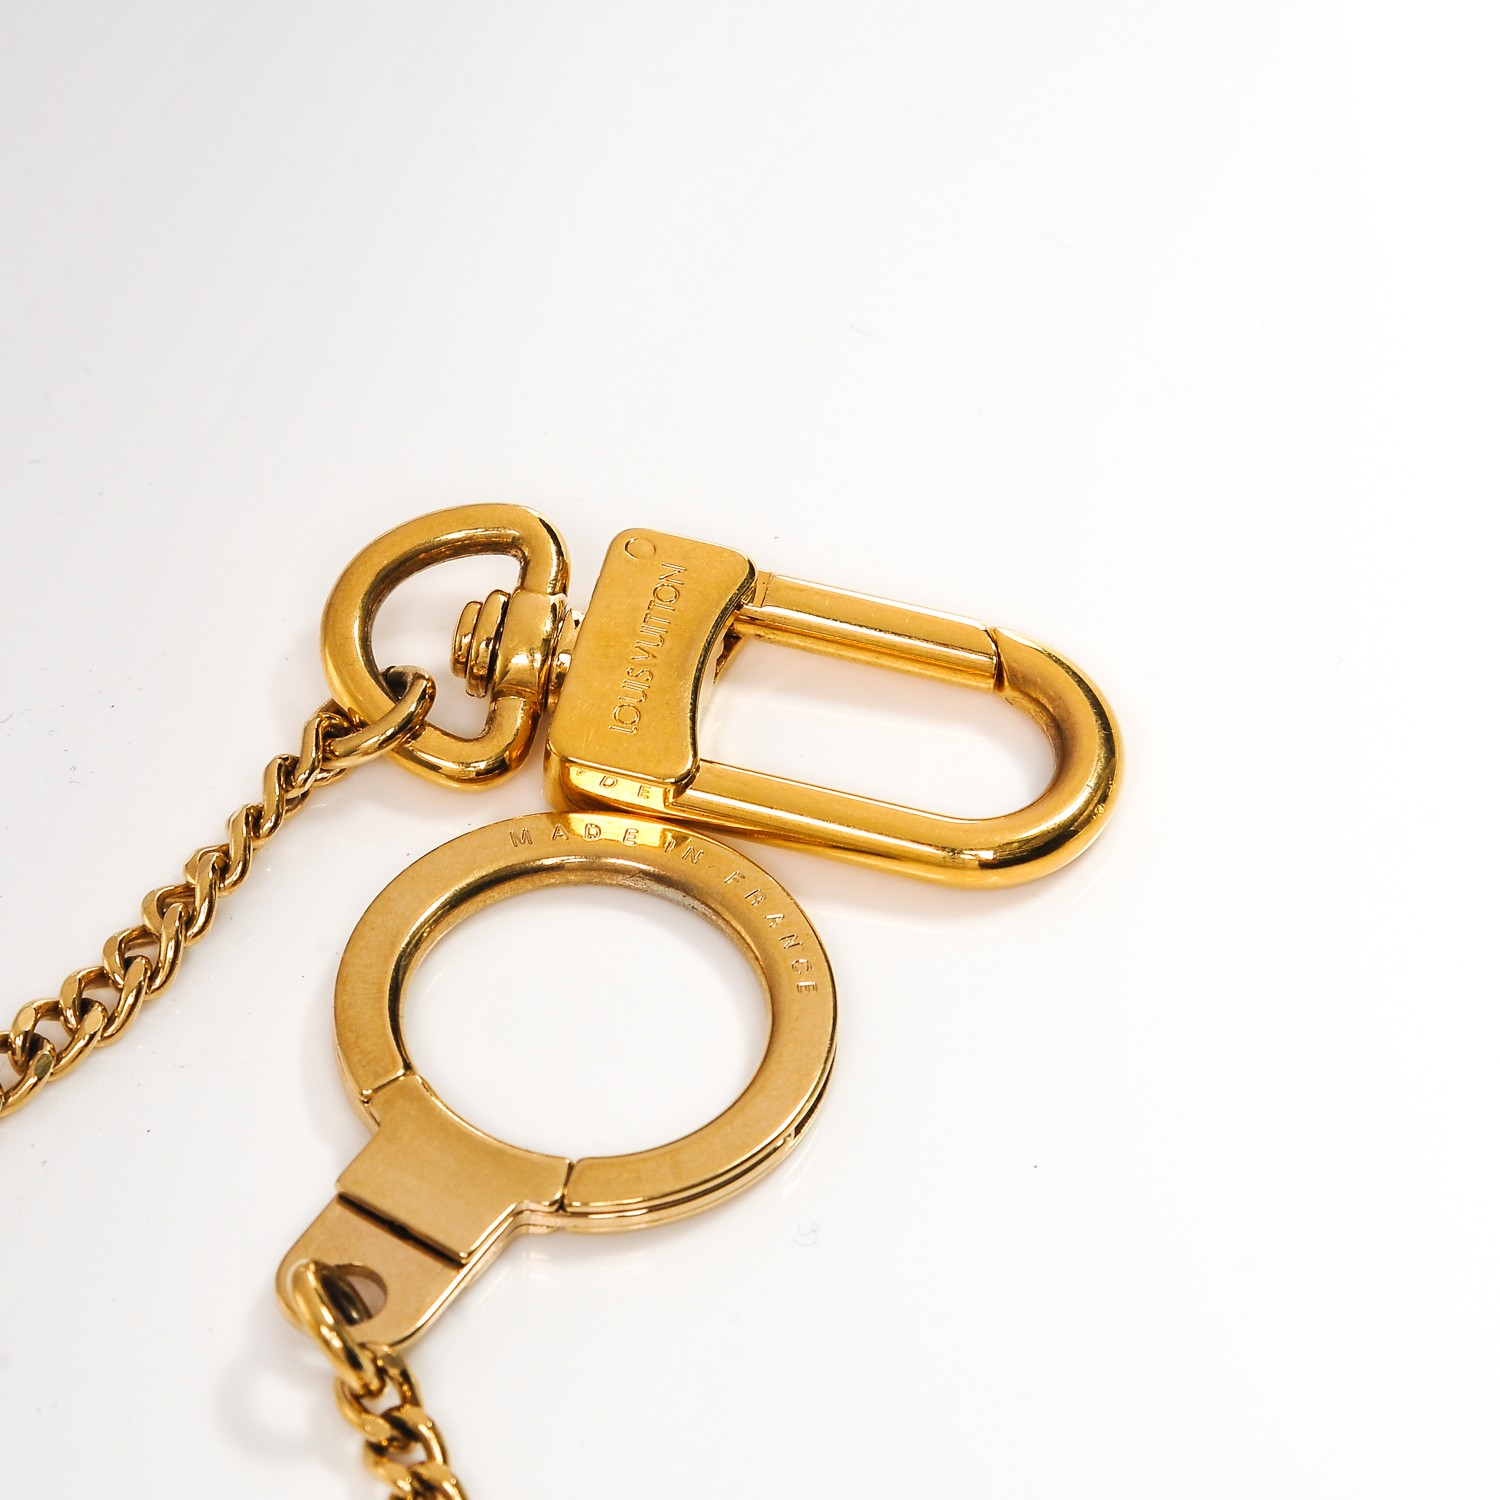 Louis Vuitton Key Ring Extender Chain - Gold Keychains, Accessories -  LOU630379